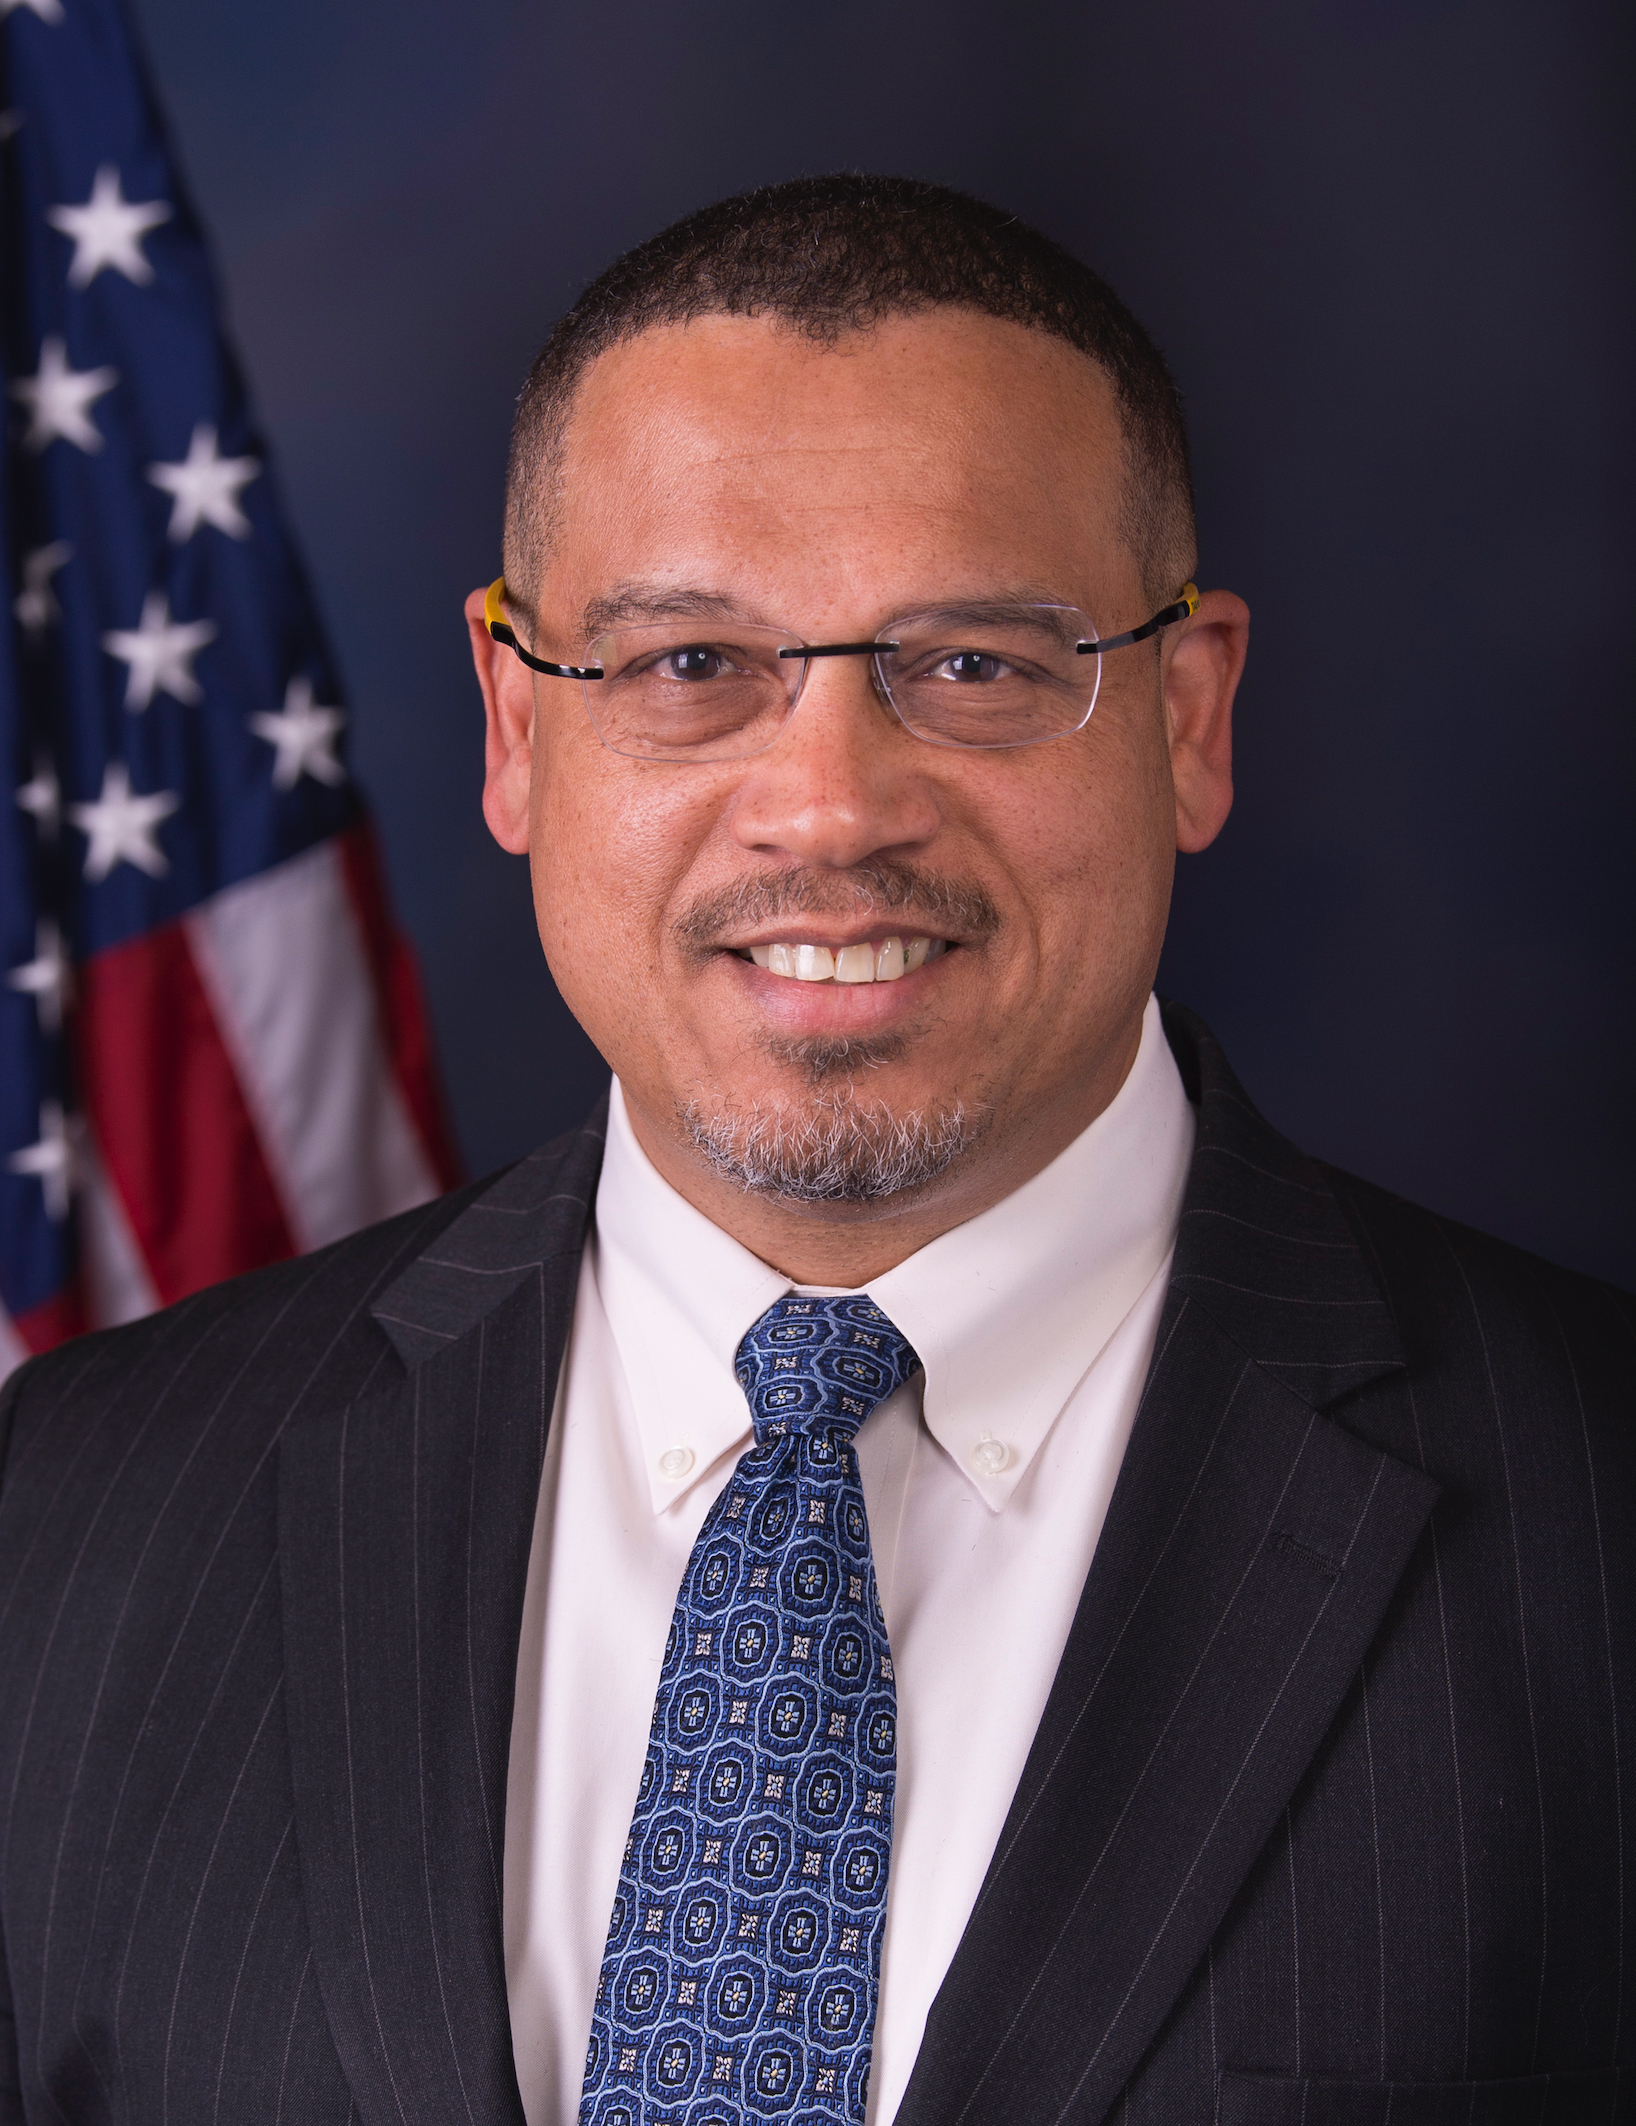 U.S. Rep Keith Ellison is first Muslim elected to the U.S. Congress placeholder image.